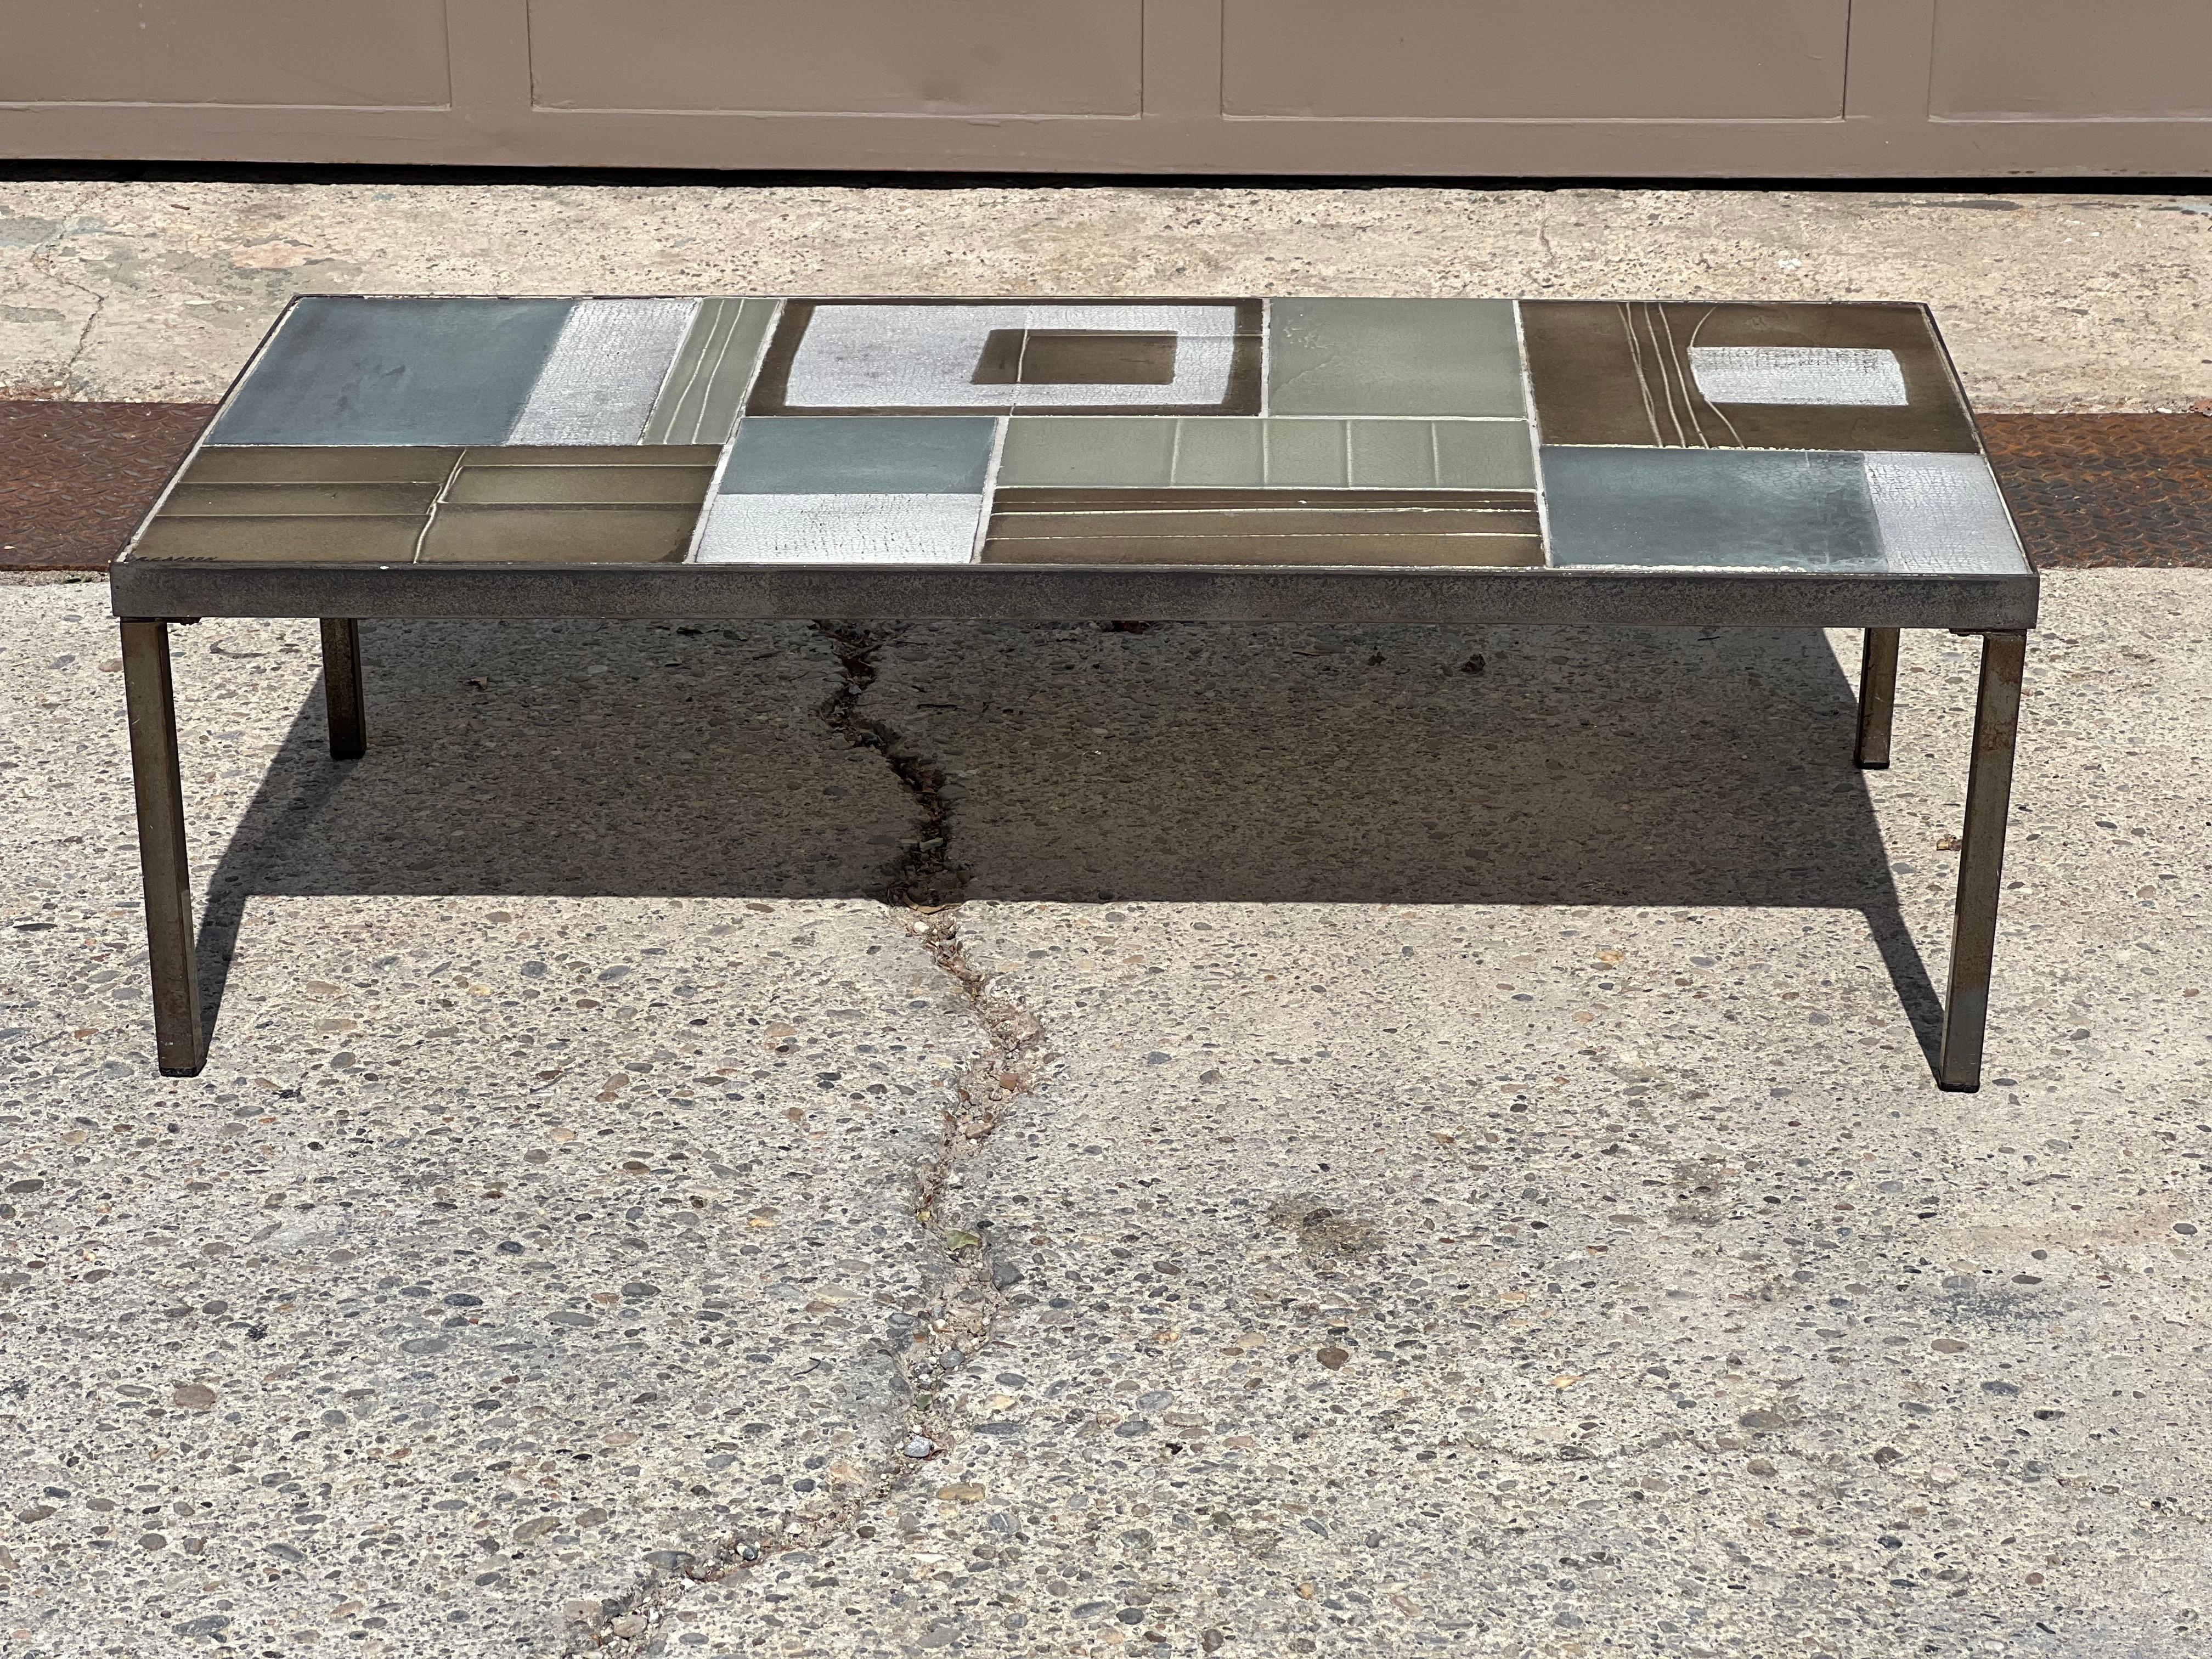 Roger Capron 1960 coffee table. Ceramic top in shades of blue and gray with geometric patterns. Black wrought iron base. Signature on the top.
Good condition